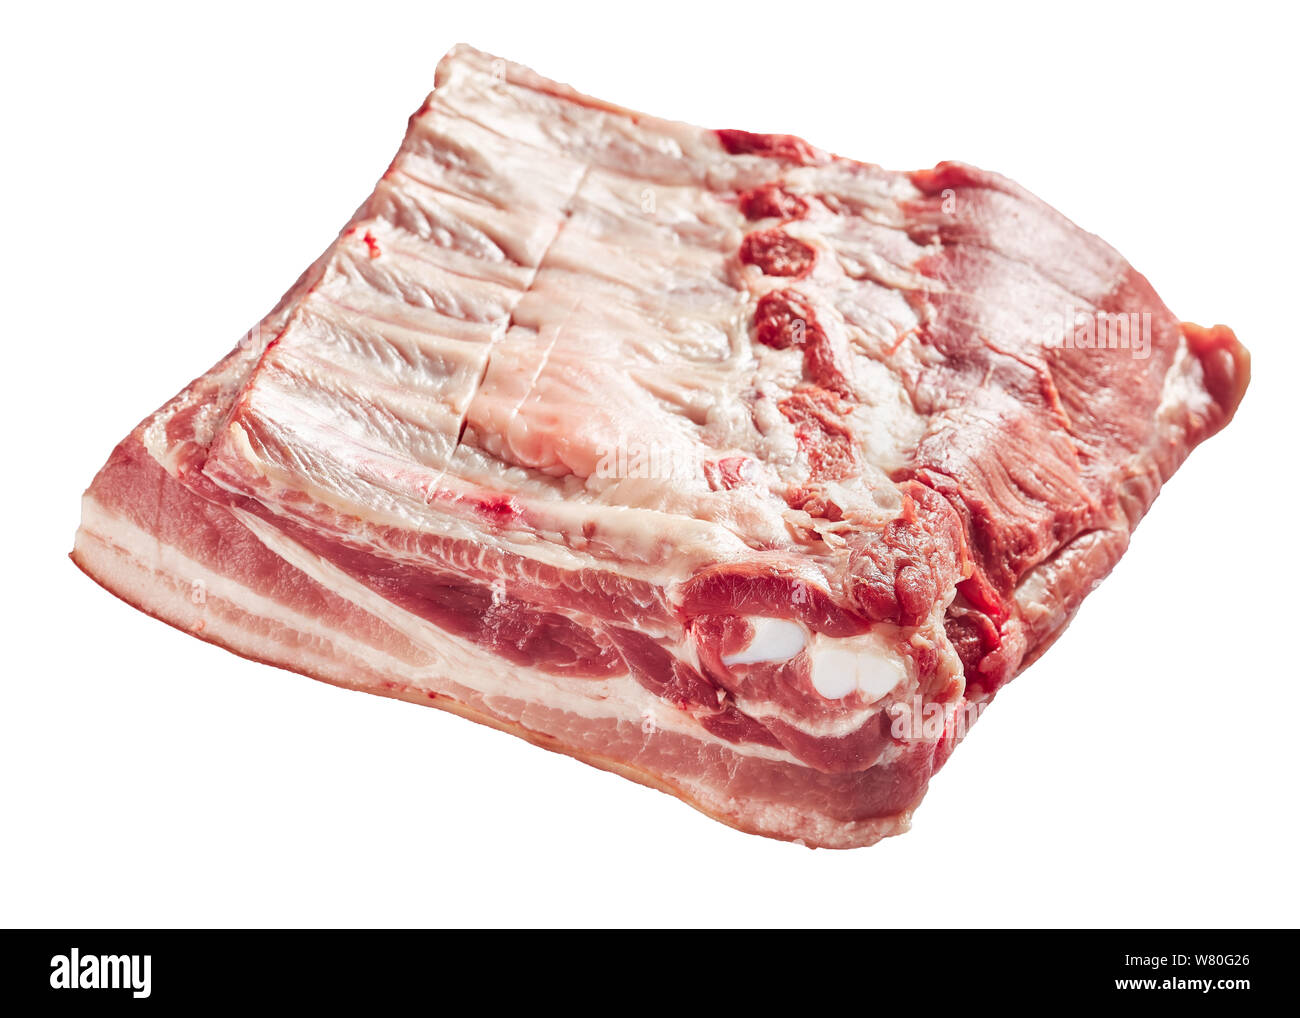 raw pork belly with spare ribs and skin isolated on the white background, view from above, close-up Stock Photo